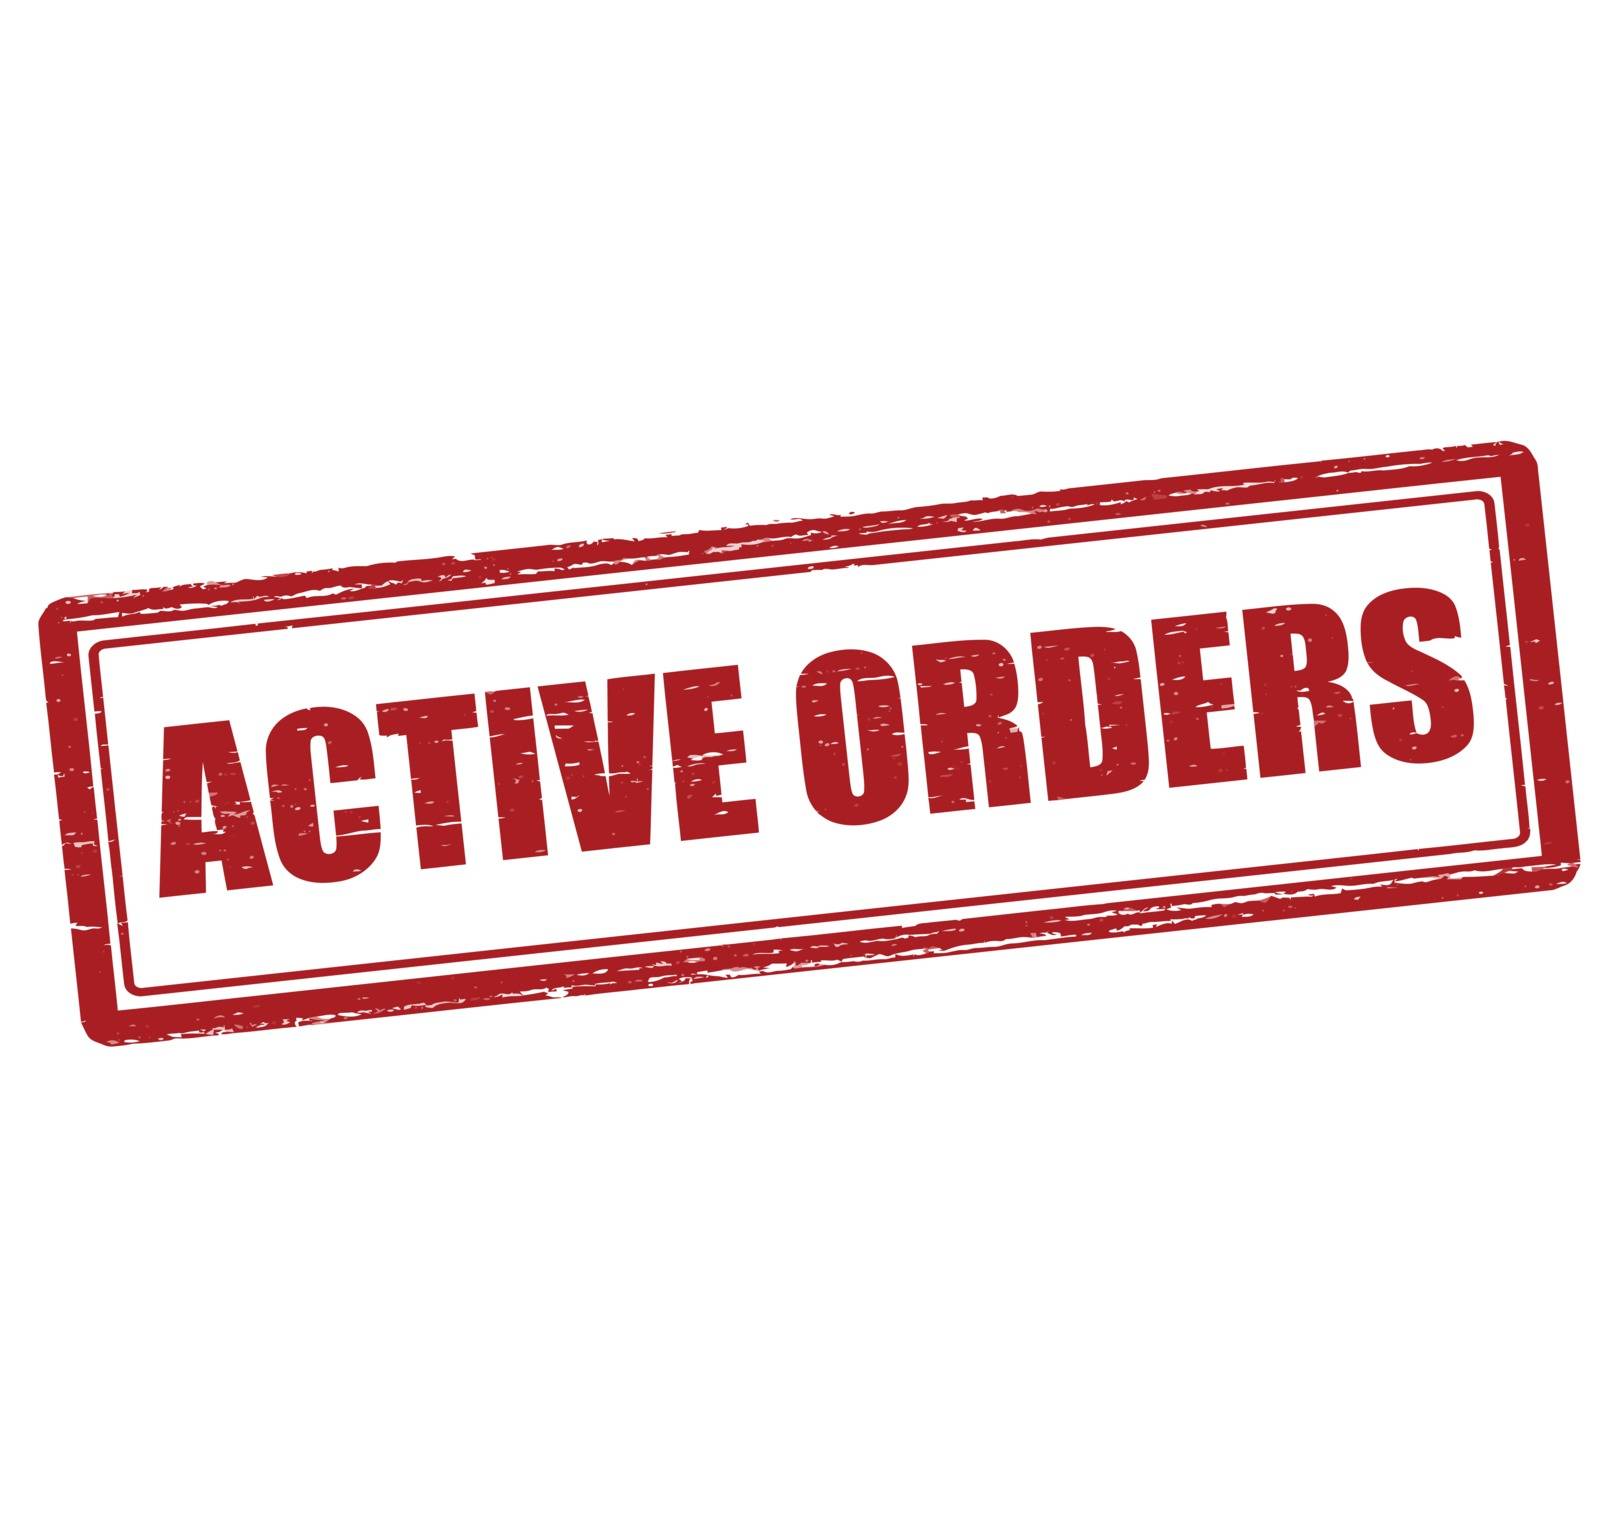 Active orders by carmenbobo